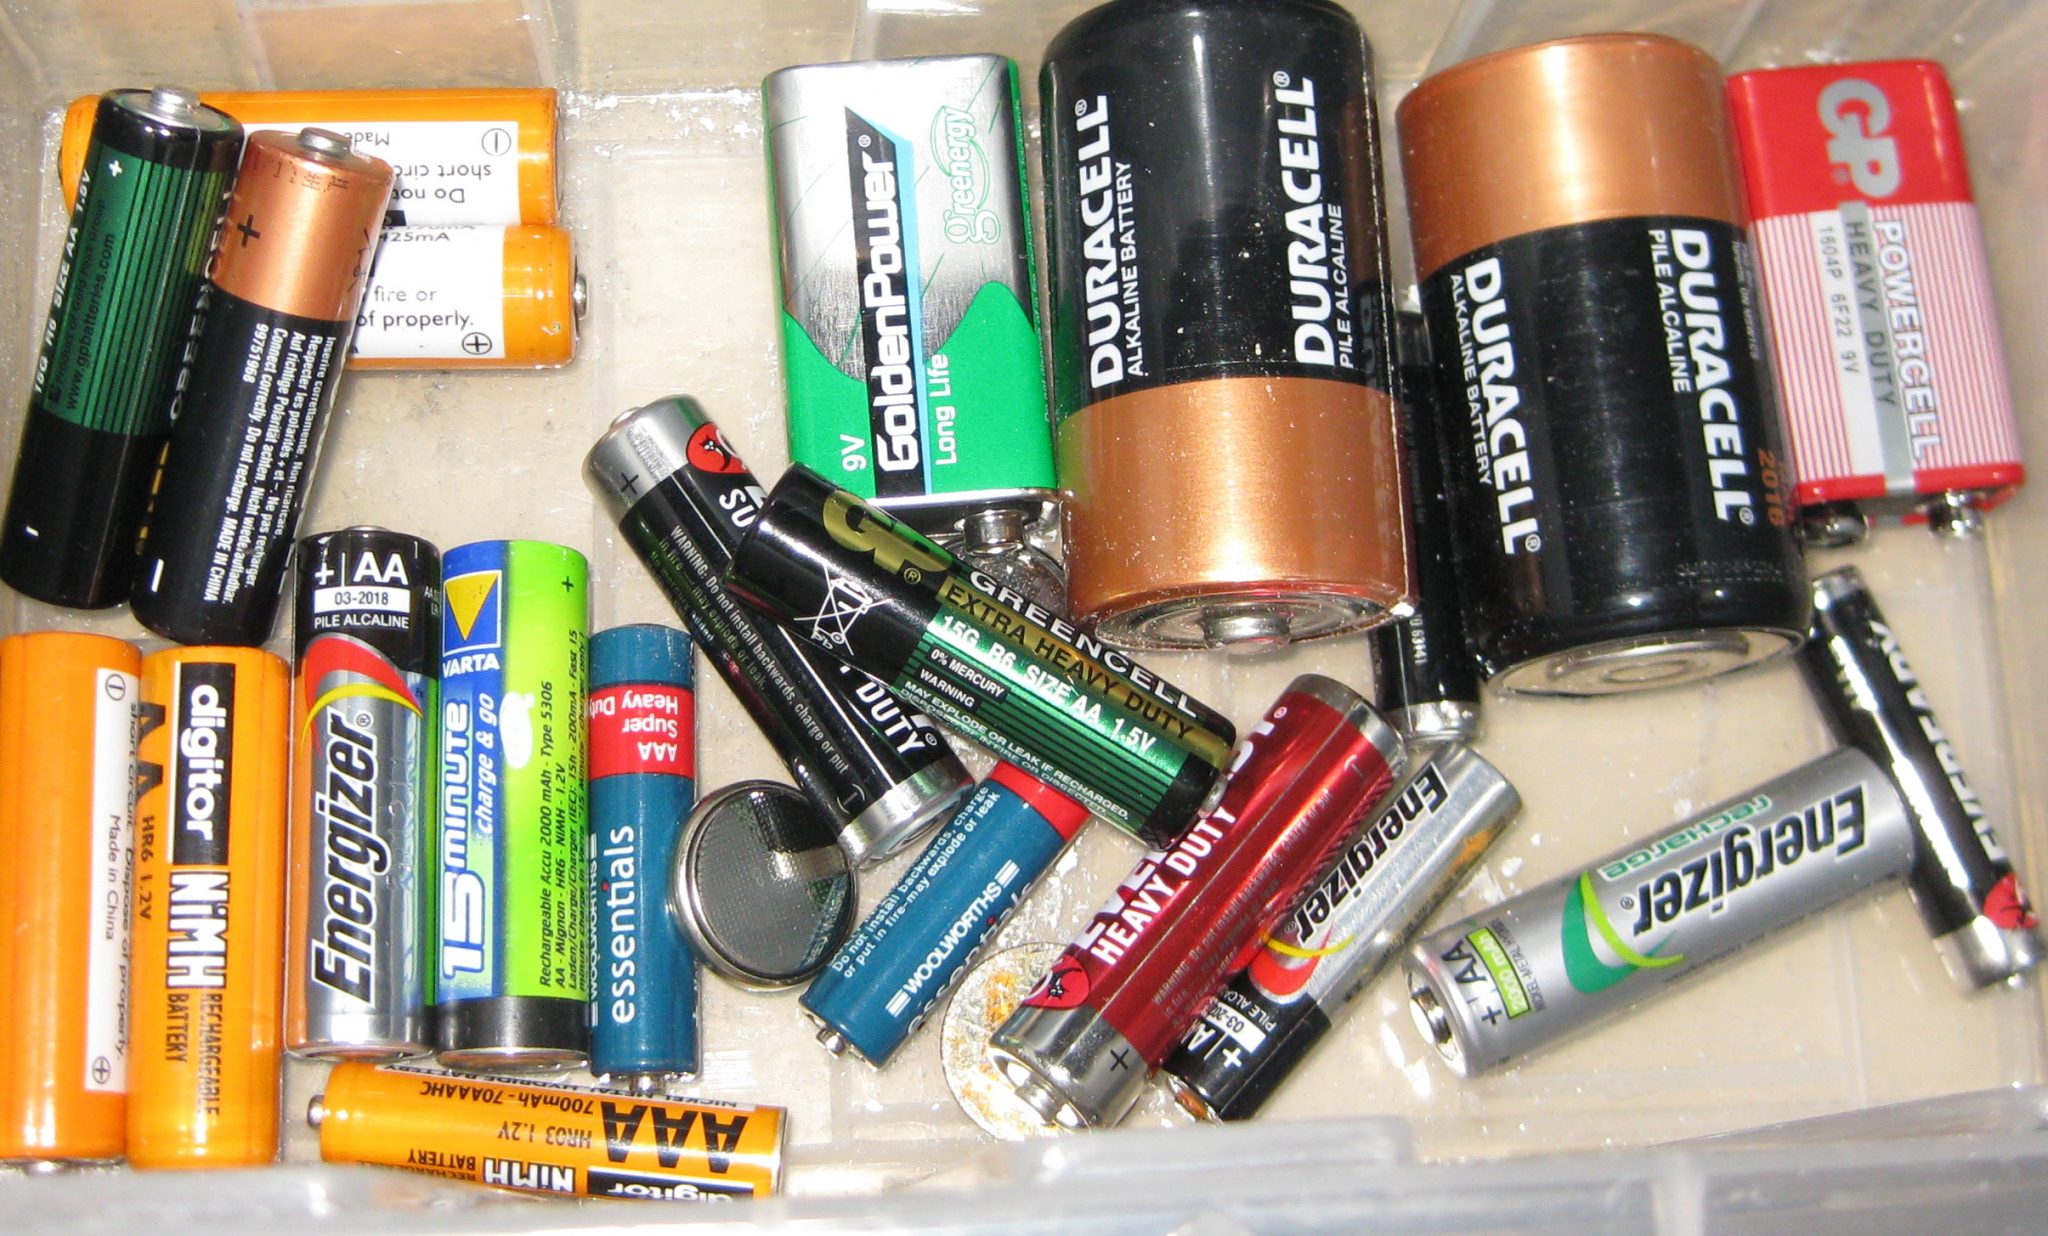 Used batteries stockpiled for recycling